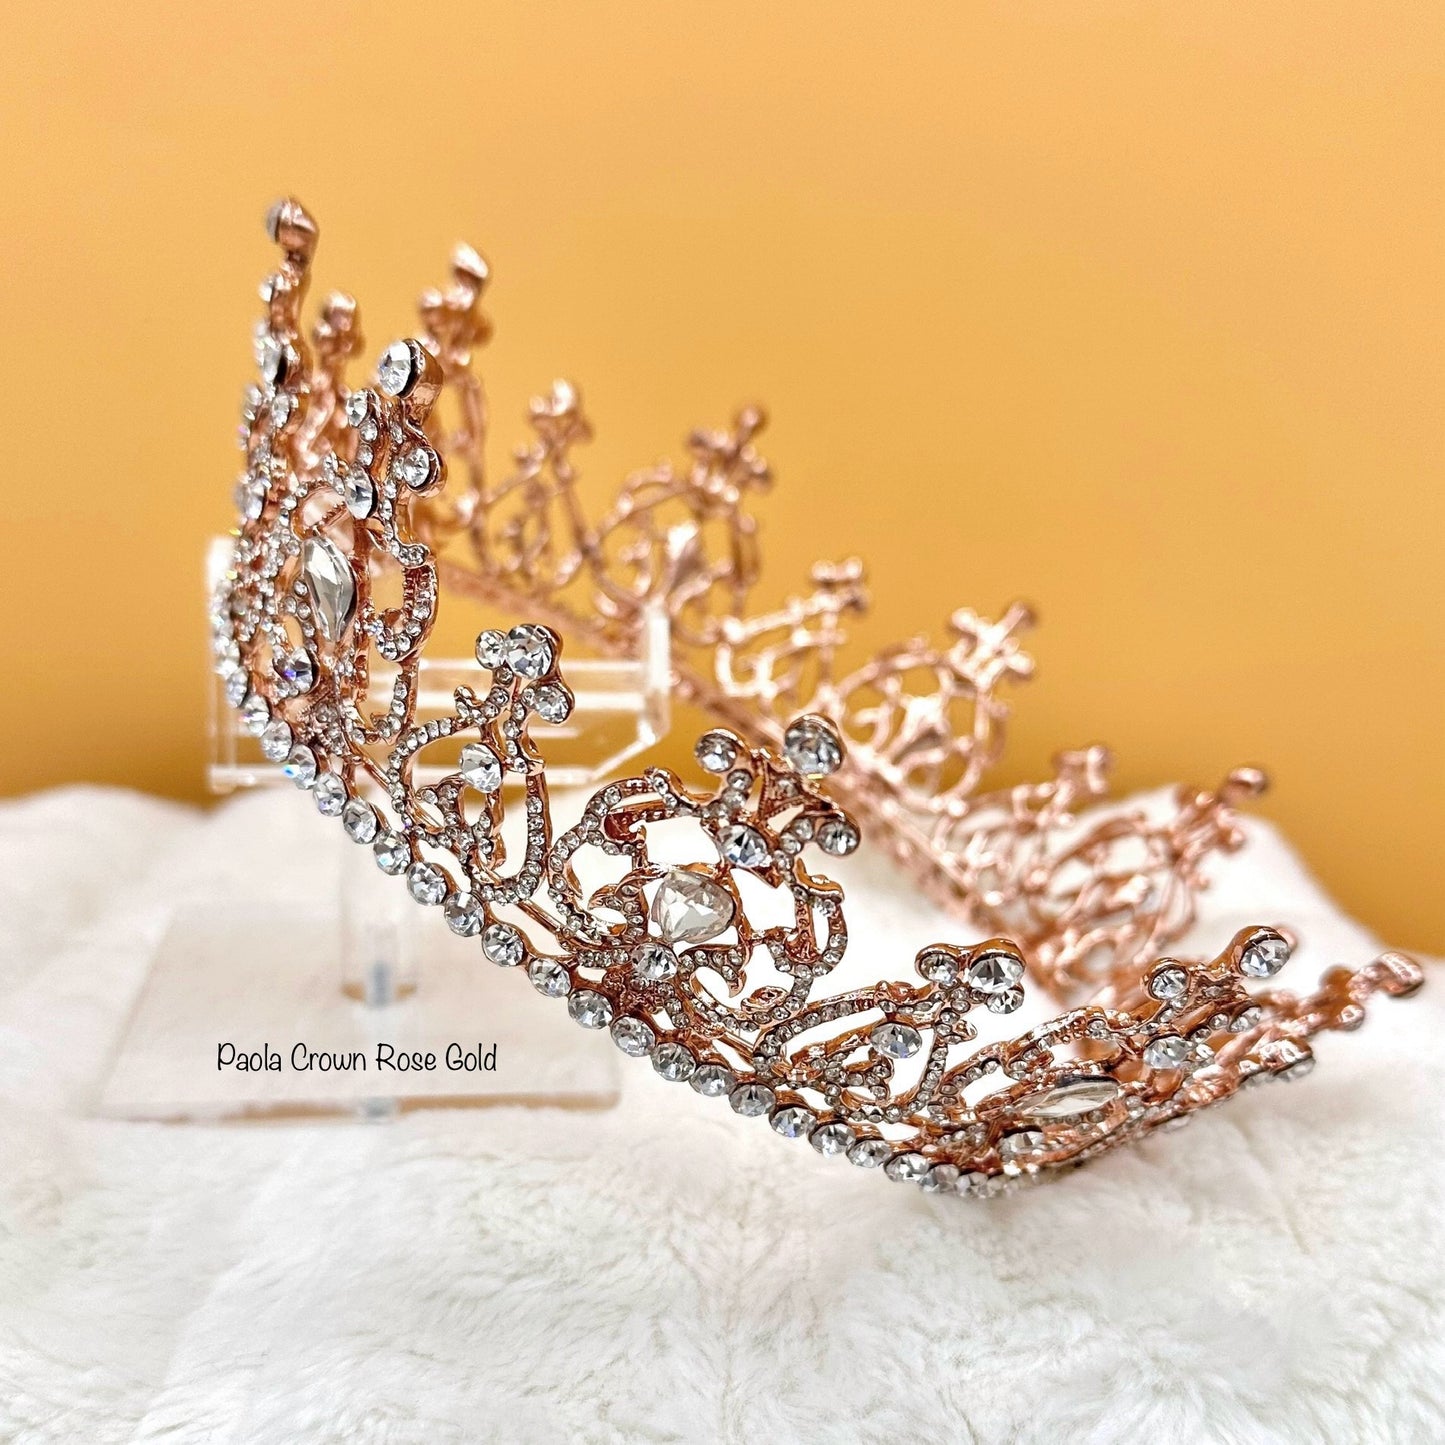 Paola Crown Rose Gold